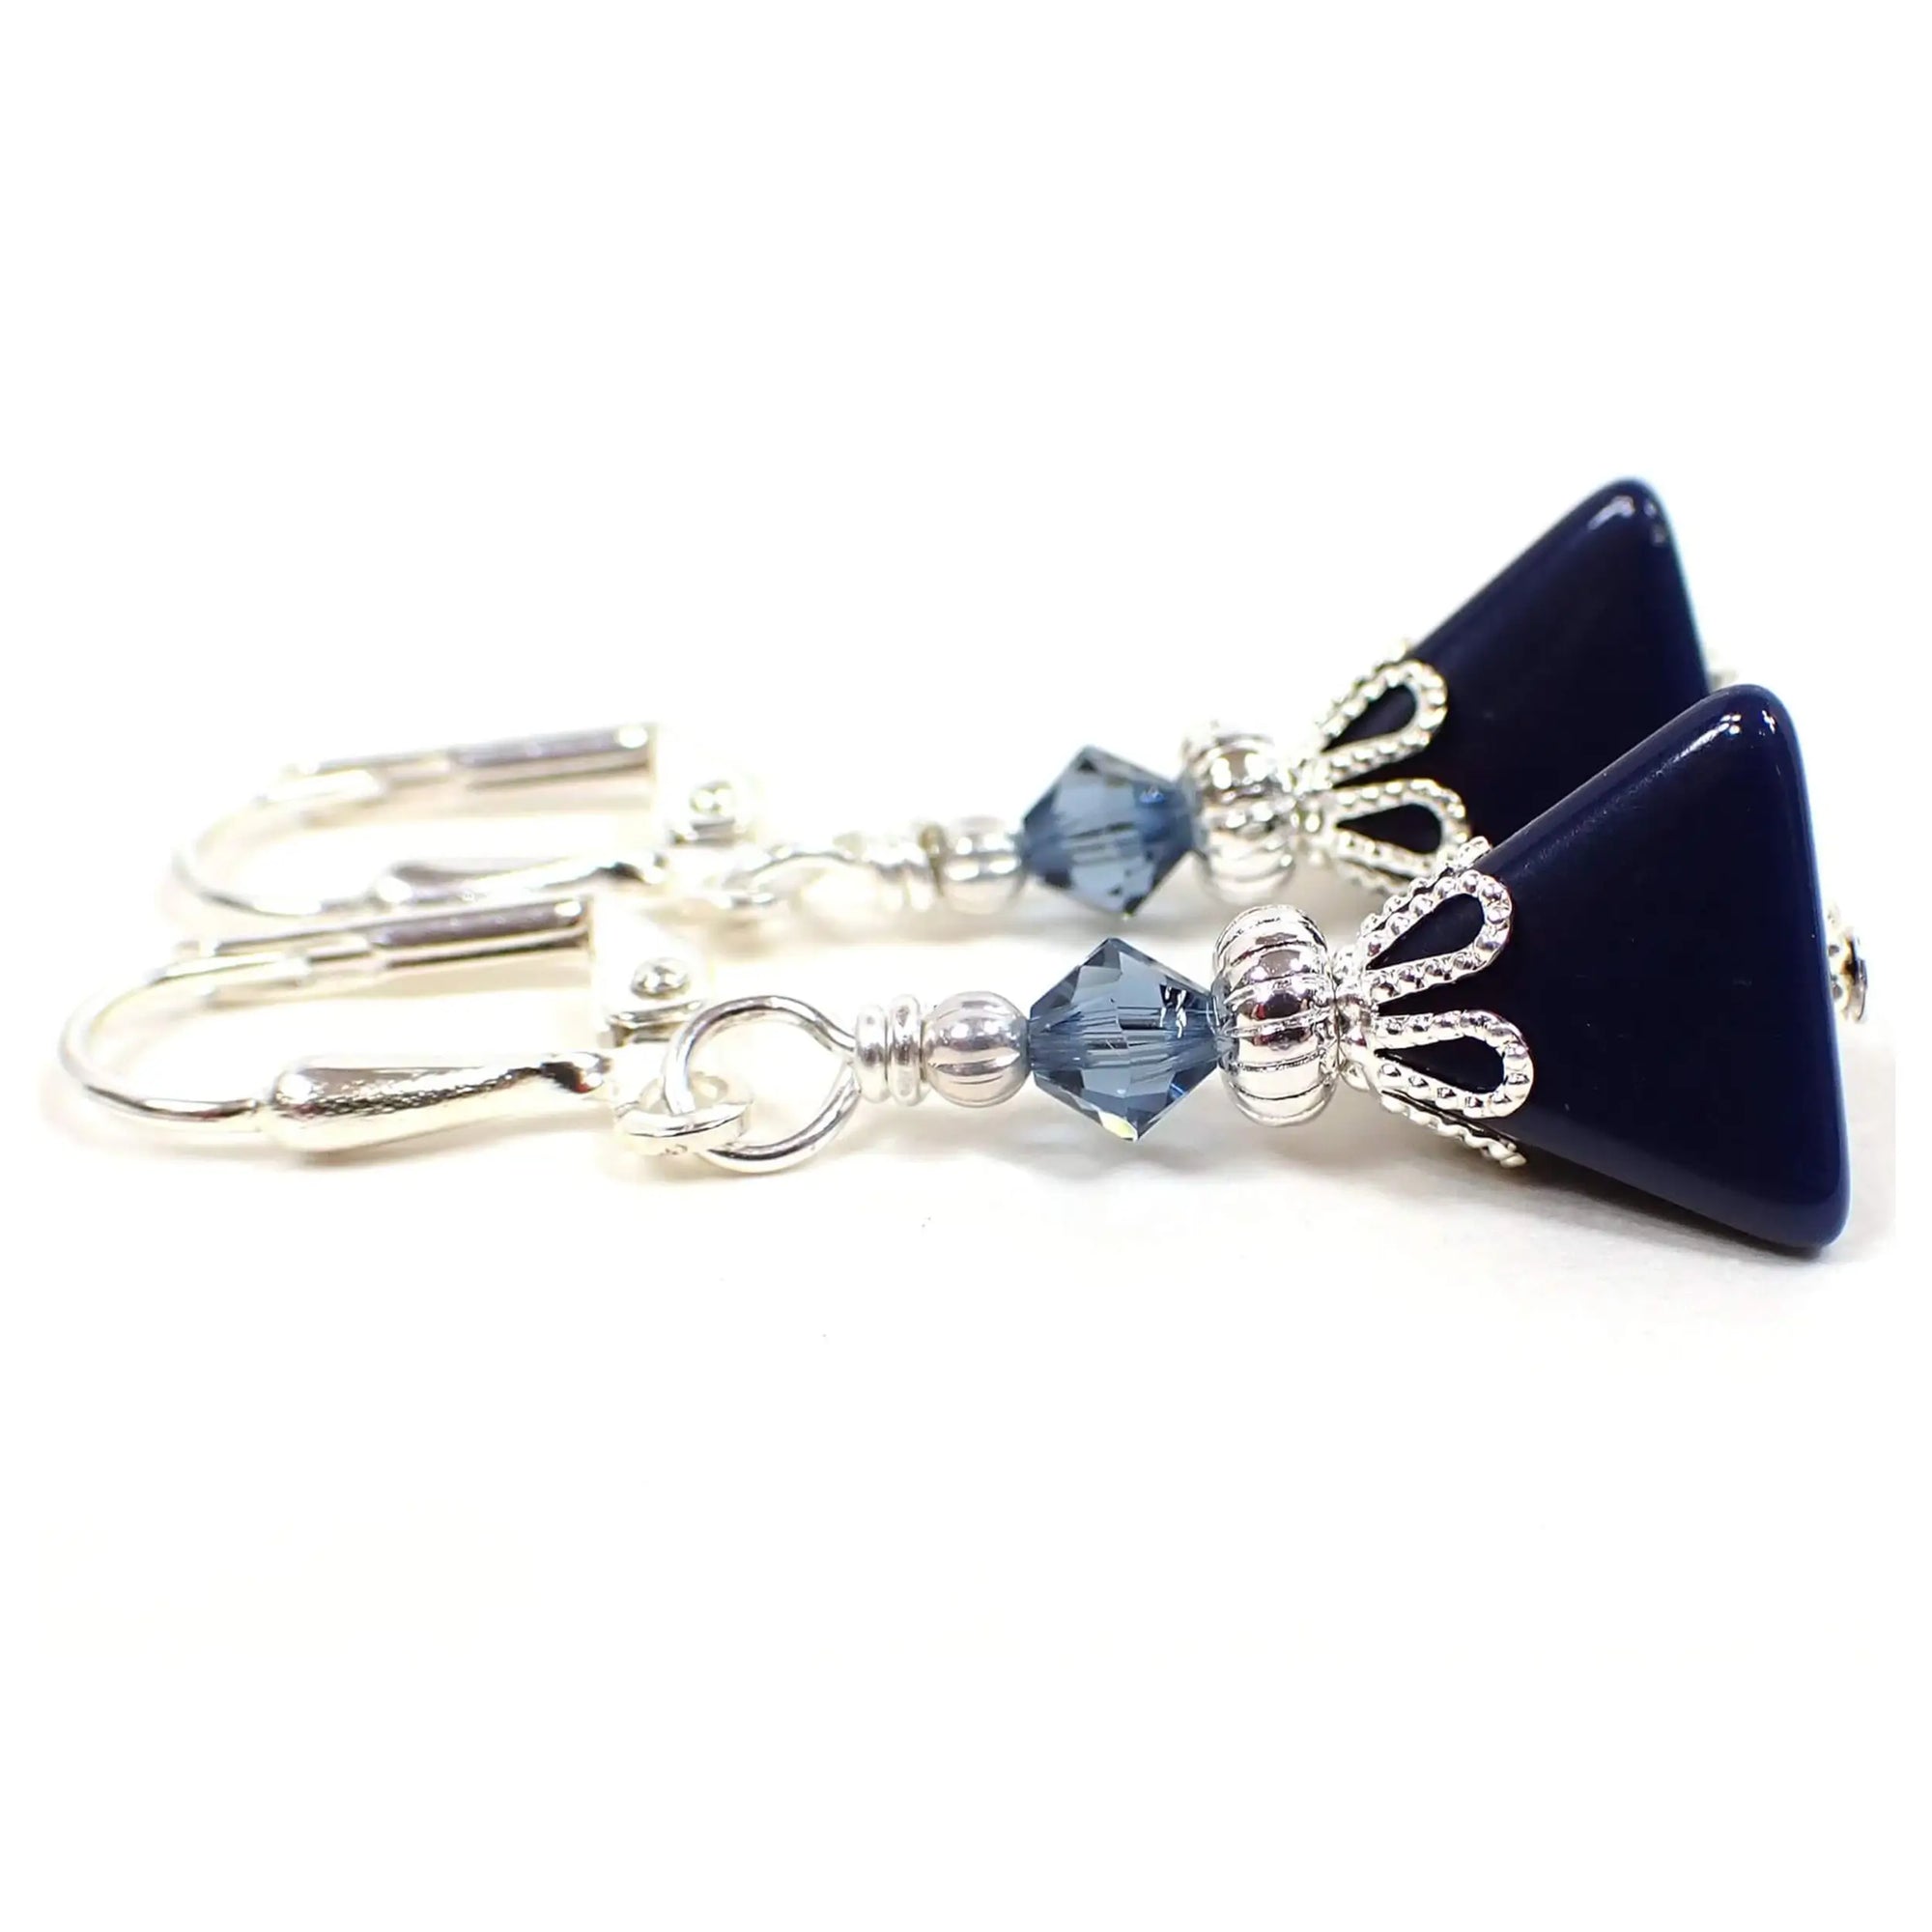 Side view of the small handmade pyramid earrings with vintage lucite beads. The metal is silver plated in color. There are new blue faceted glass crystal beads at the top. The bottom lucite beads are triangle pyramid shaped and dark blue in color.